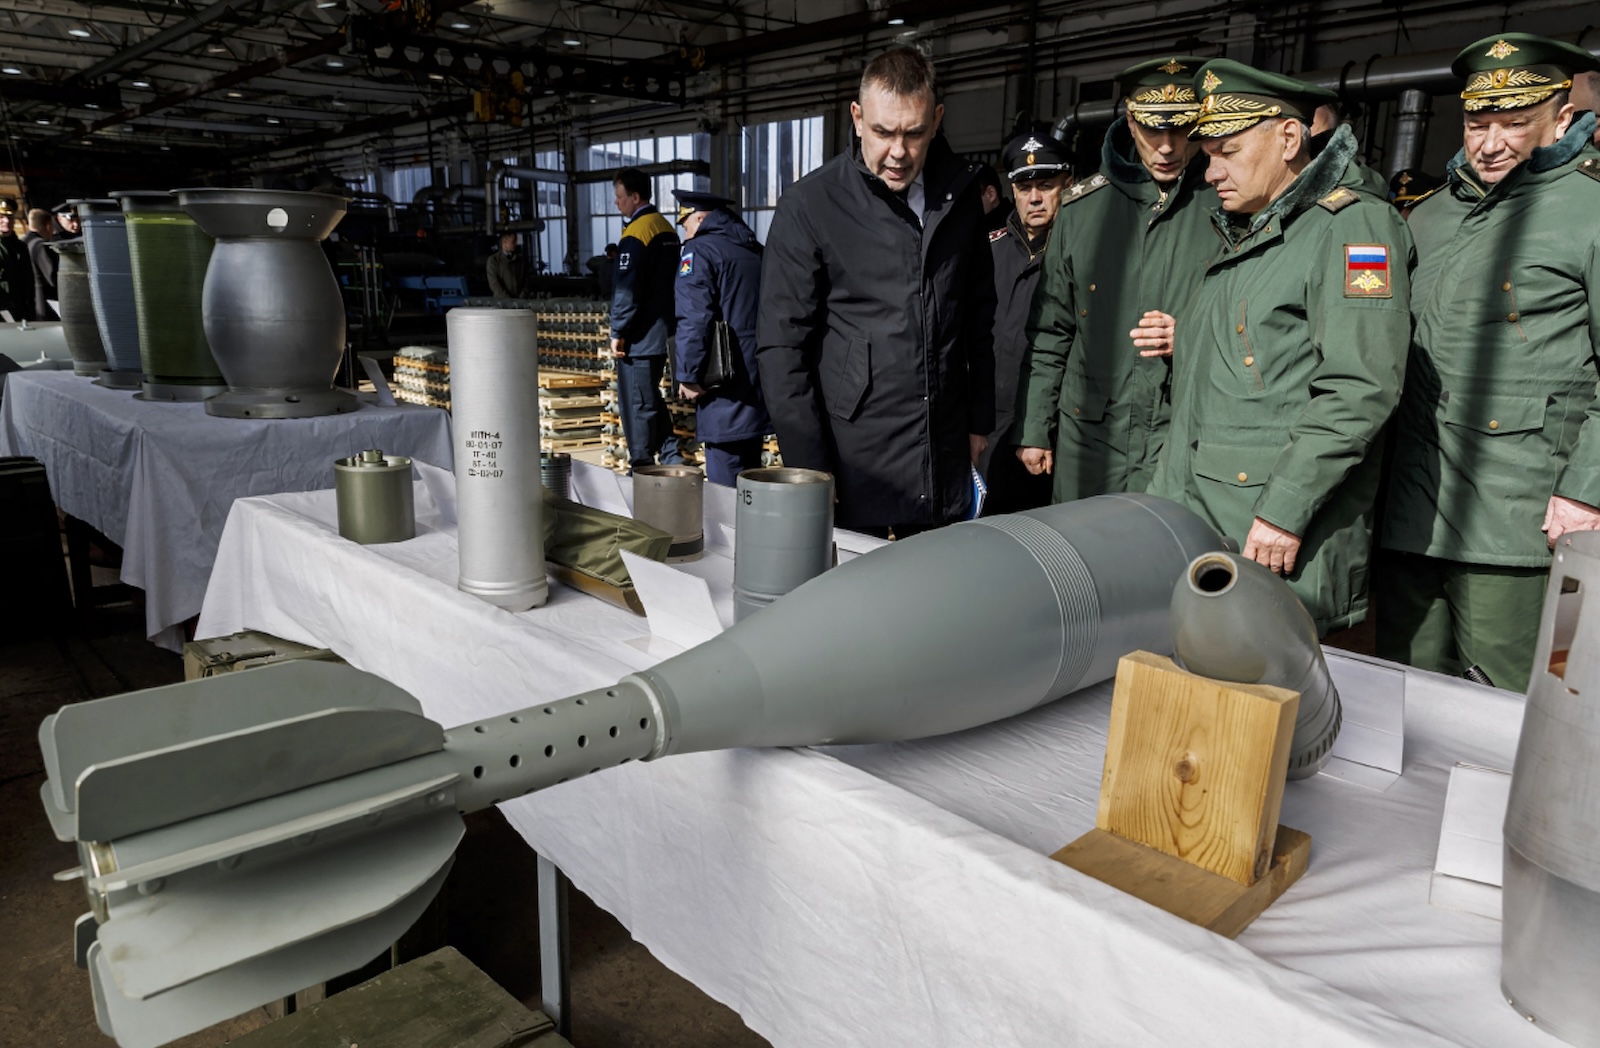 epa11233918 A handout photo made available by the Russian Defence Ministry Press-Service shows Russian Defense Minister Sergei Shoigu (2-R) inspecting the implementation of the state defense order by military ammunition enterprises in Nizhny Novgorod, Russia, 21 March 2024. Russian Defense Minister Shoigu inspected defense industry enterprises in the Nizhny Novgorod Region, where he was informed about the increased production of aerial bombs, including the FAB-500, FAB-1500 and FAB-3000, the Russian Defence Ministry announced.  EPA/VADIM SAVITSKY/RUSSIAN DEFENCE MINISTRY PRESS SERVICE HANDOUT -- MANDATORY CREDIT -- HANDOUT EDITORIAL USE ONLY/NO SALES HANDOUT EDITORIAL USE ONLY/NO SALES